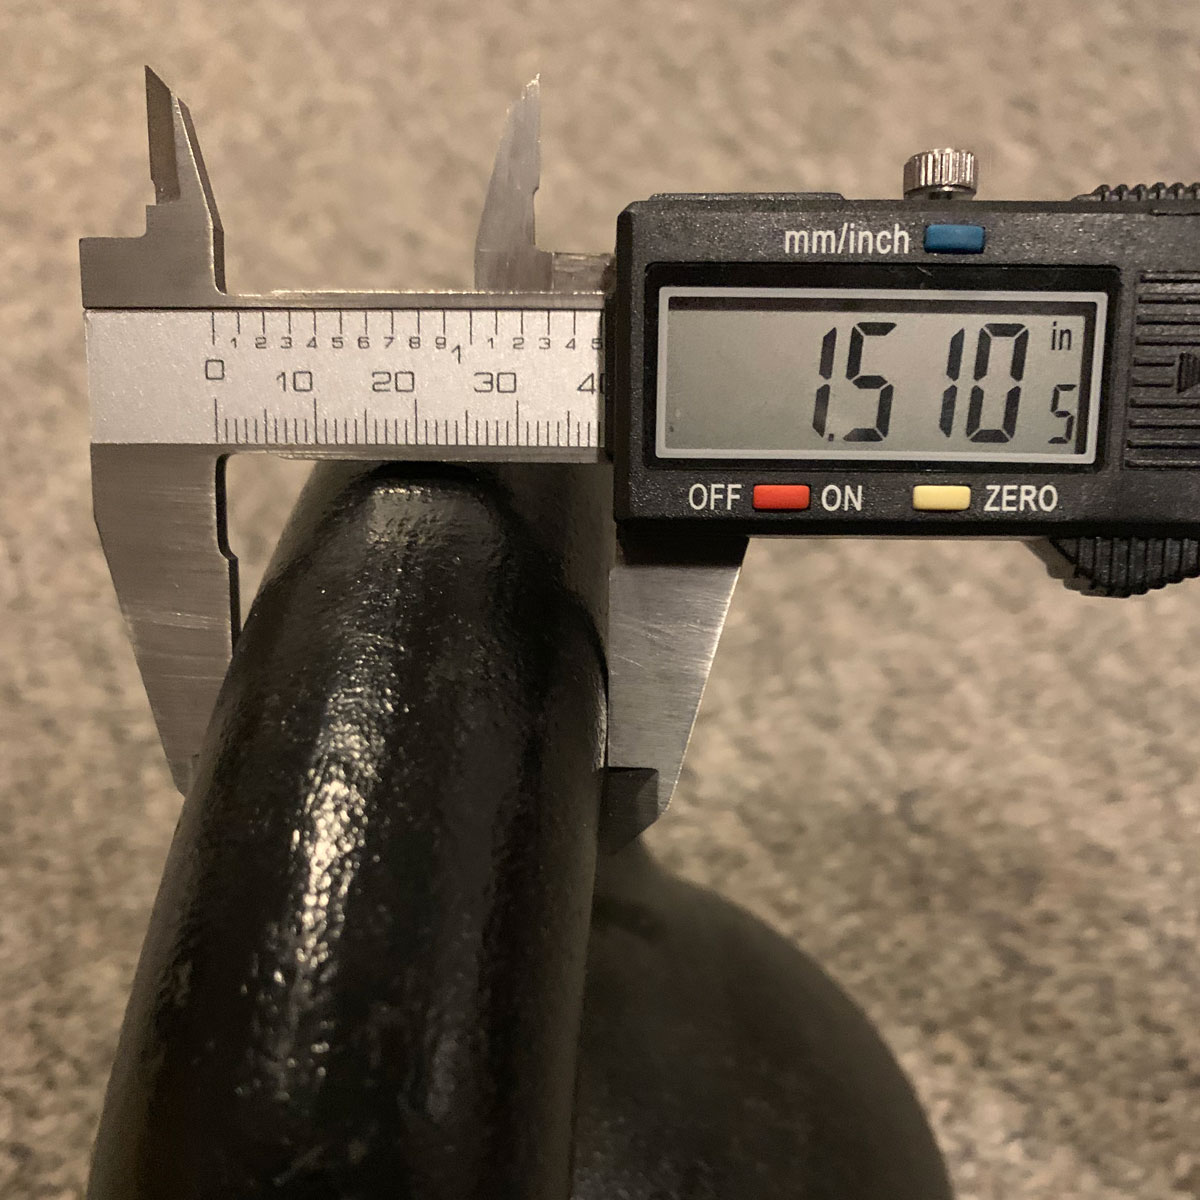 measuring the diameter of a Dragon Door Kettlebell handle with digital calipers in inches